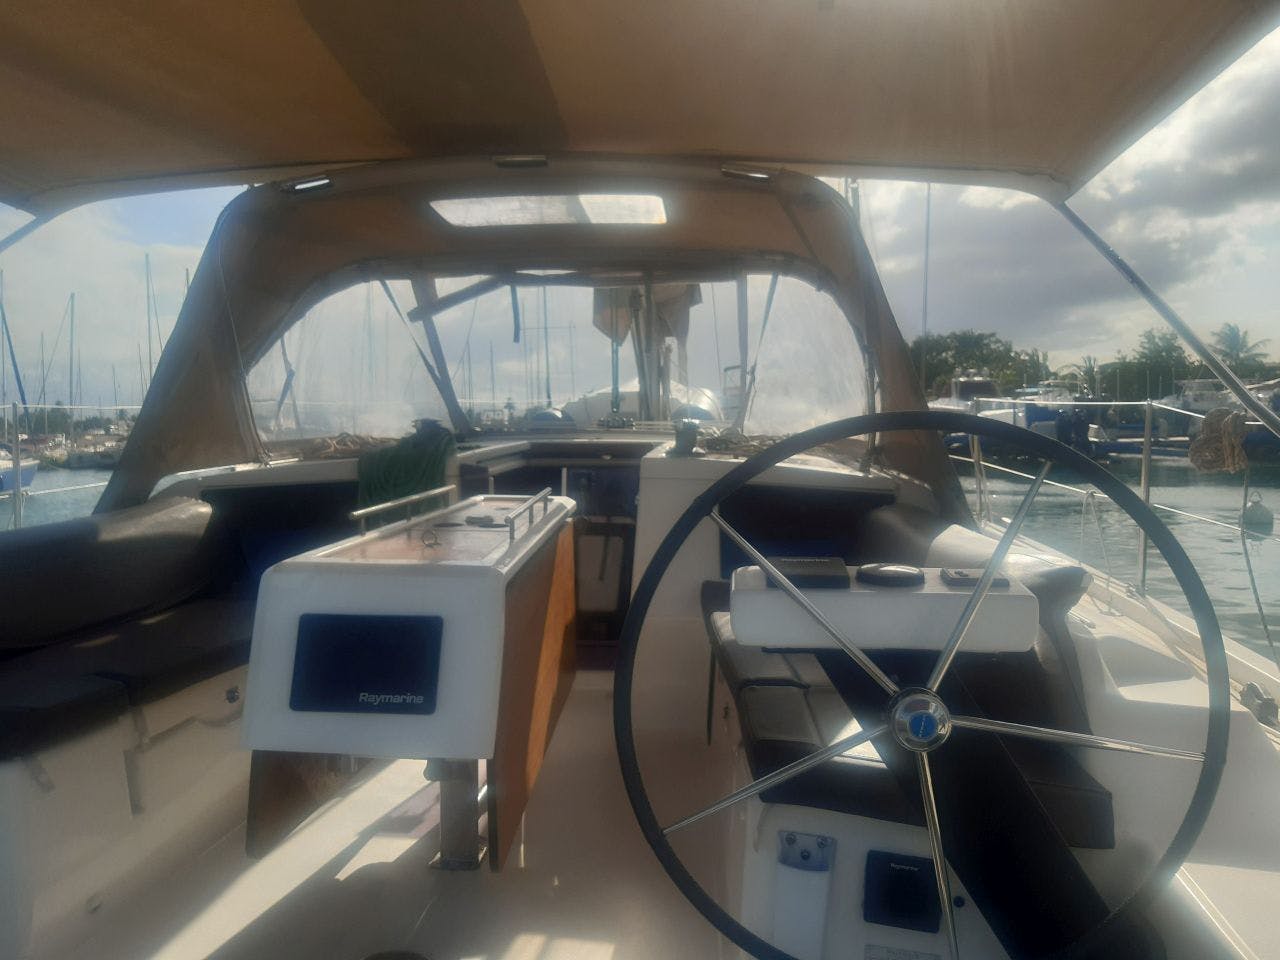 Book Dufour 390 GL Sailing yacht for bareboat charter in Guadeloupe, La Marina Bas du Fort, Guadeloupe, Caribbean with TripYacht!, picture 3